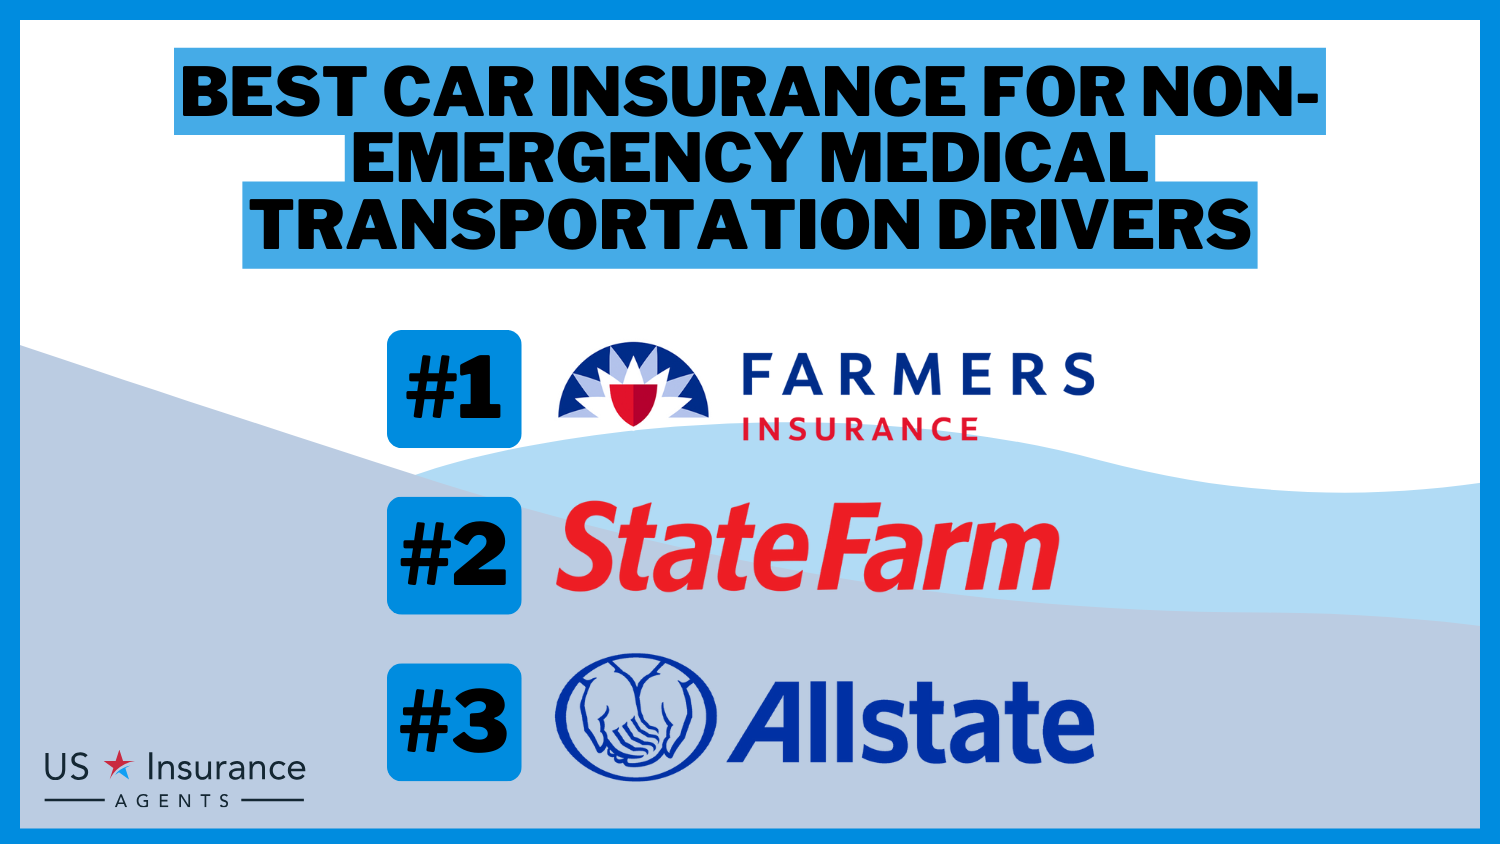 Farmers, State Farm, Allstate: Best Car Insurance for Non-Emergency Medical Transportation Drivers